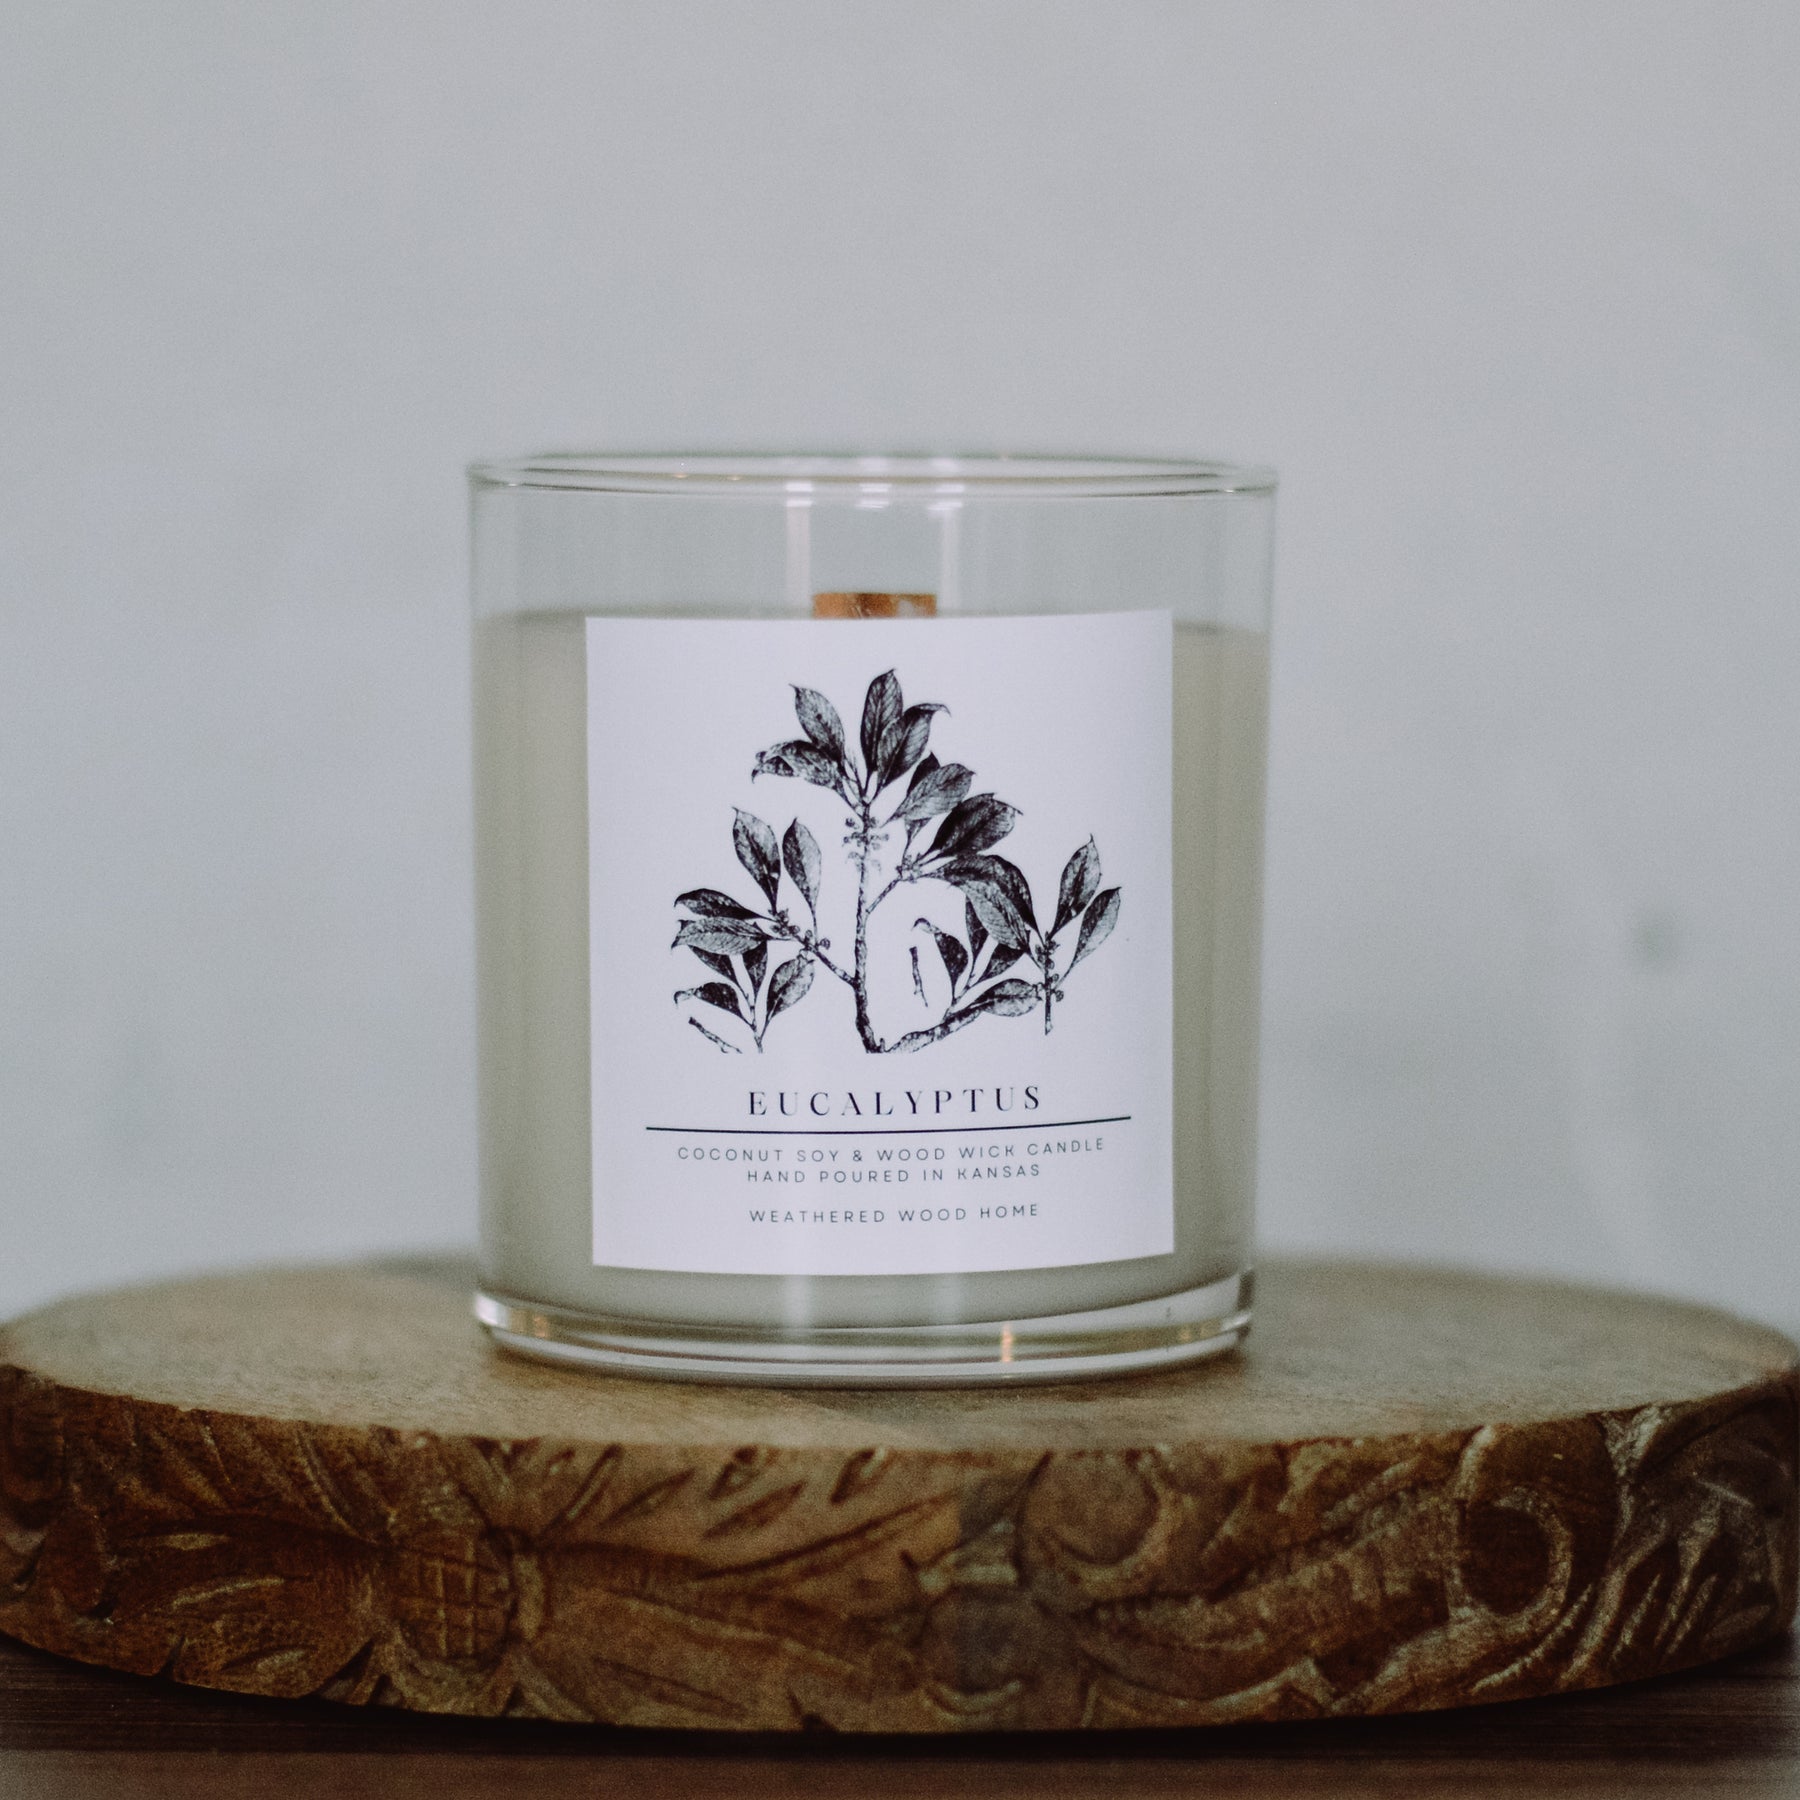 Cashmere - Wood Wick Candle